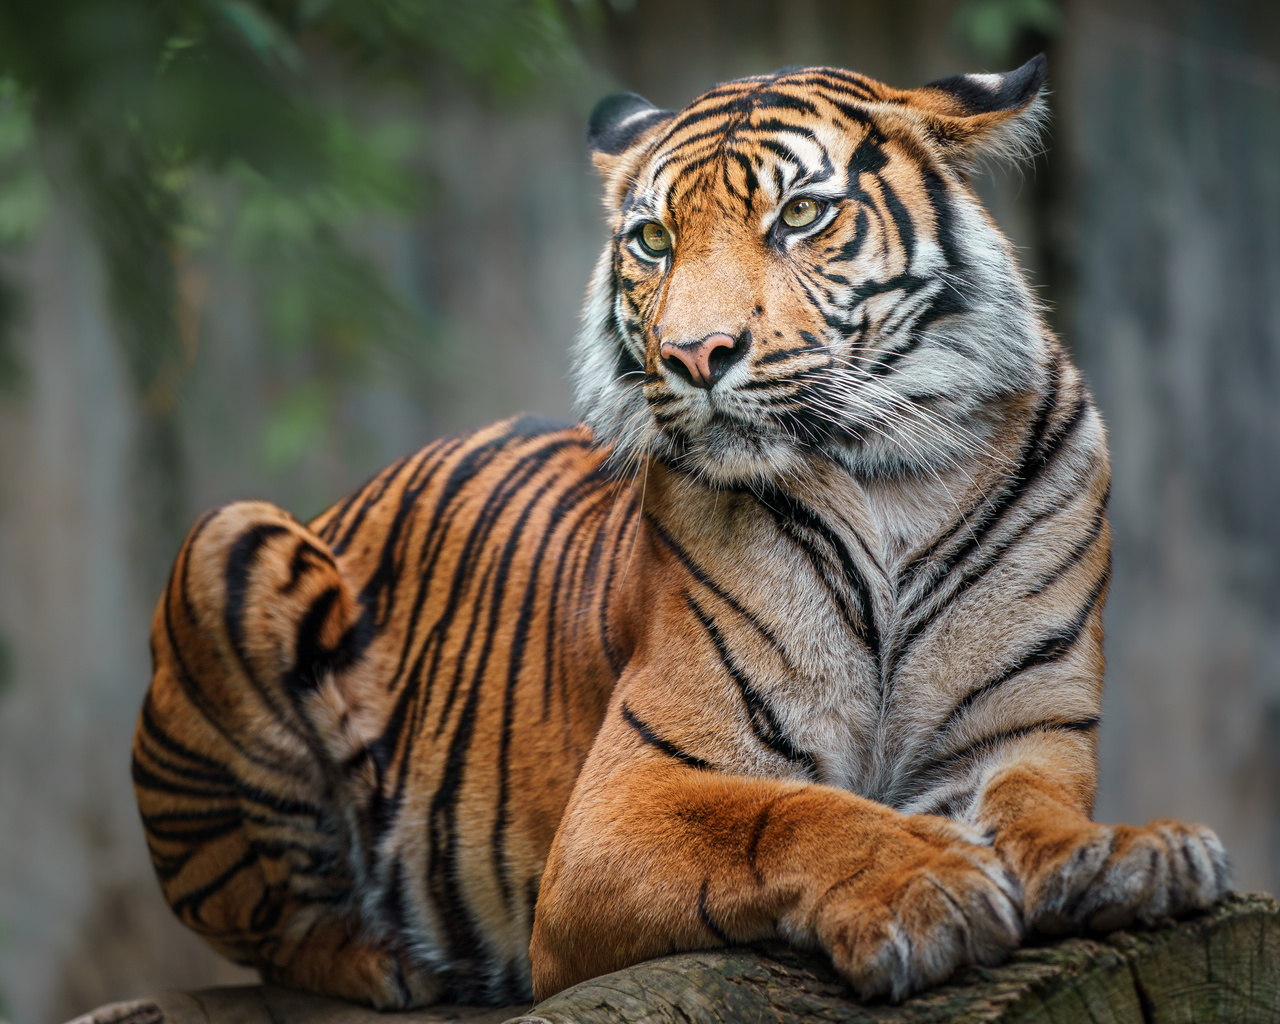 action, aggressive, aggression, anger, angry, animal, asia, beast, beautiful, beauty, bengal, big